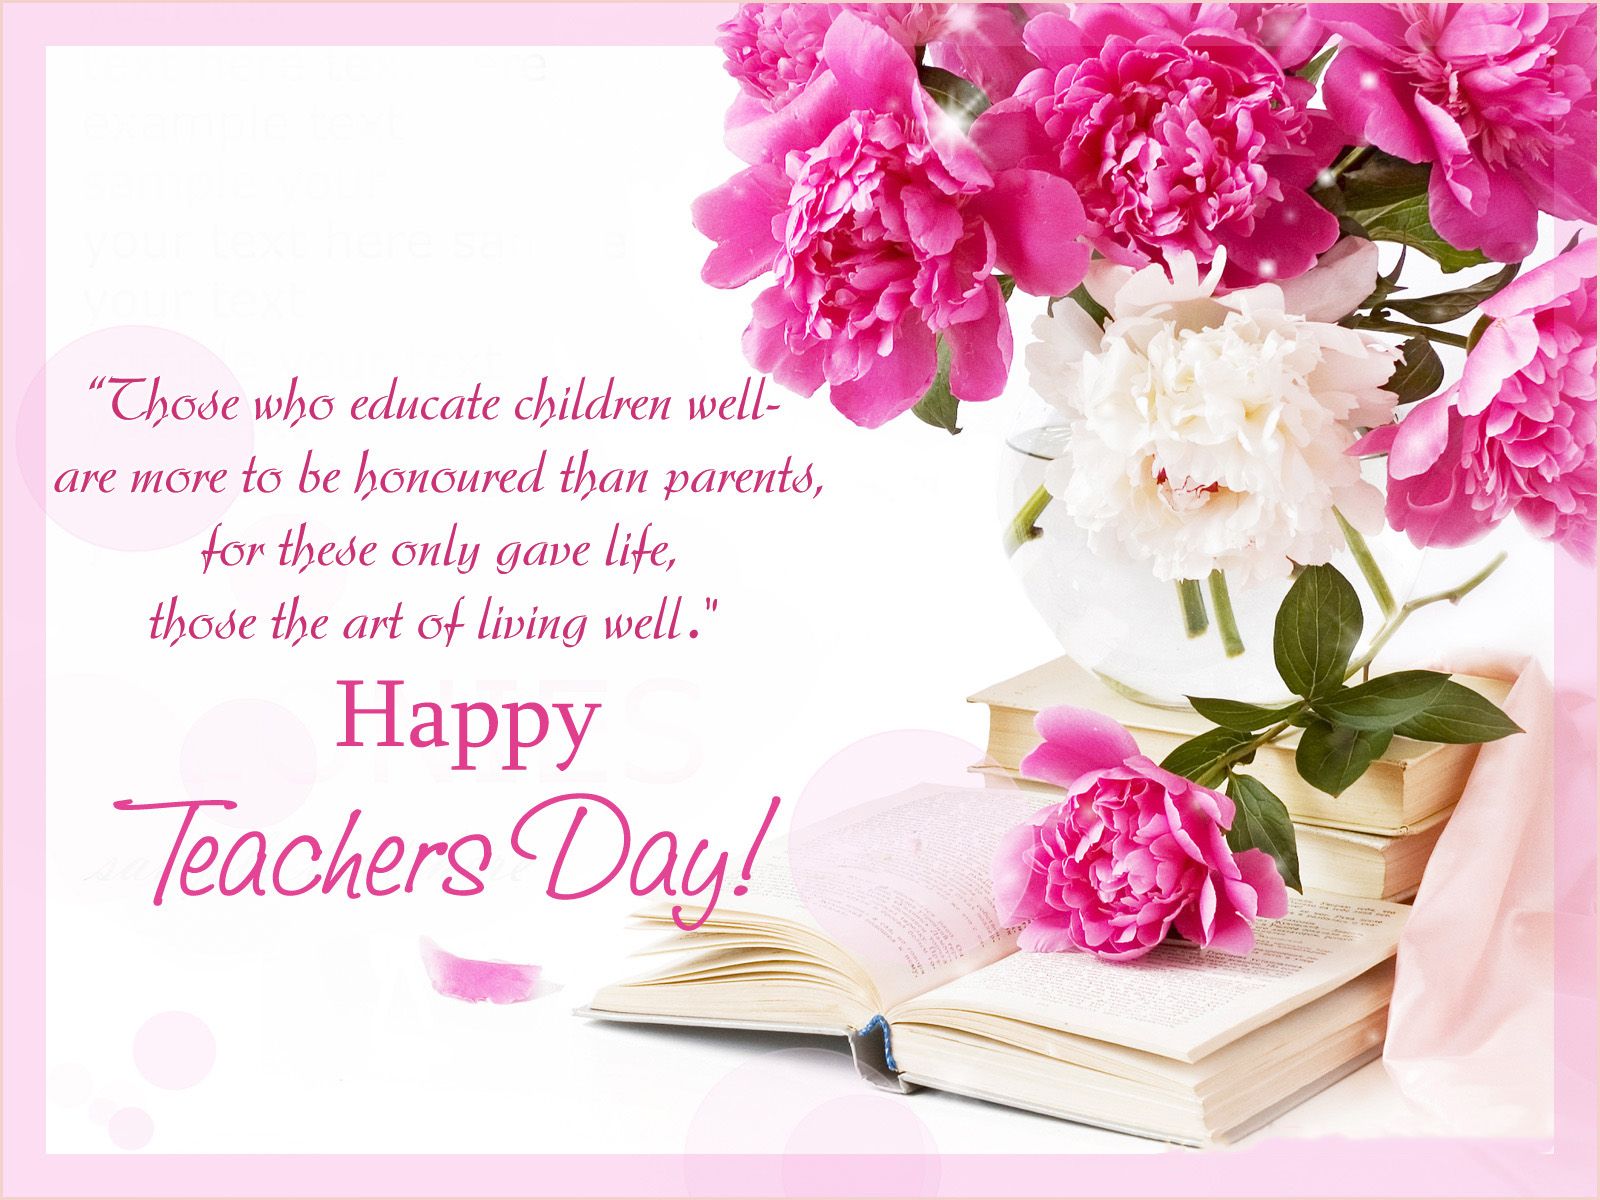 Happy Teachers Day Wallpaper, Image, Picture, Greetings Birthday Dear Teacher Wallpaper & Background Download